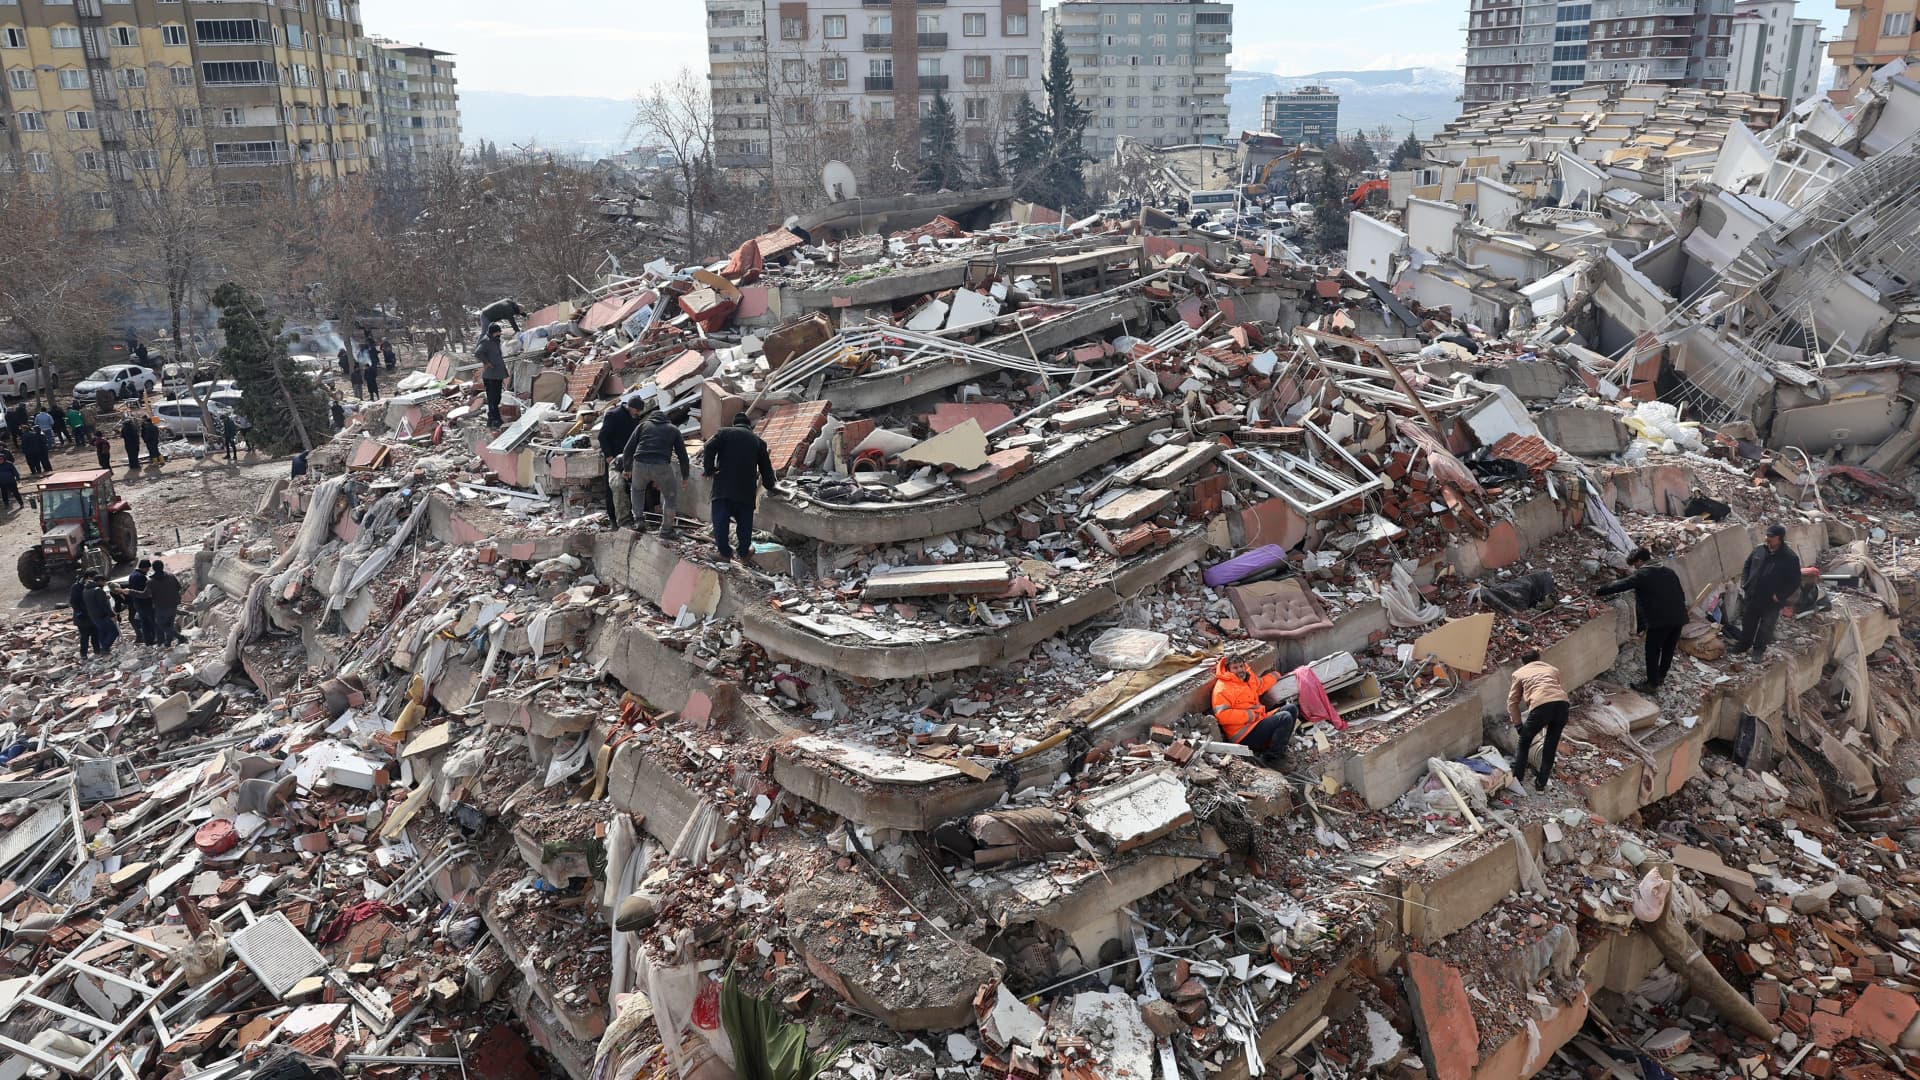 Turkey’s earthquake comes at a critical time for the country’s future